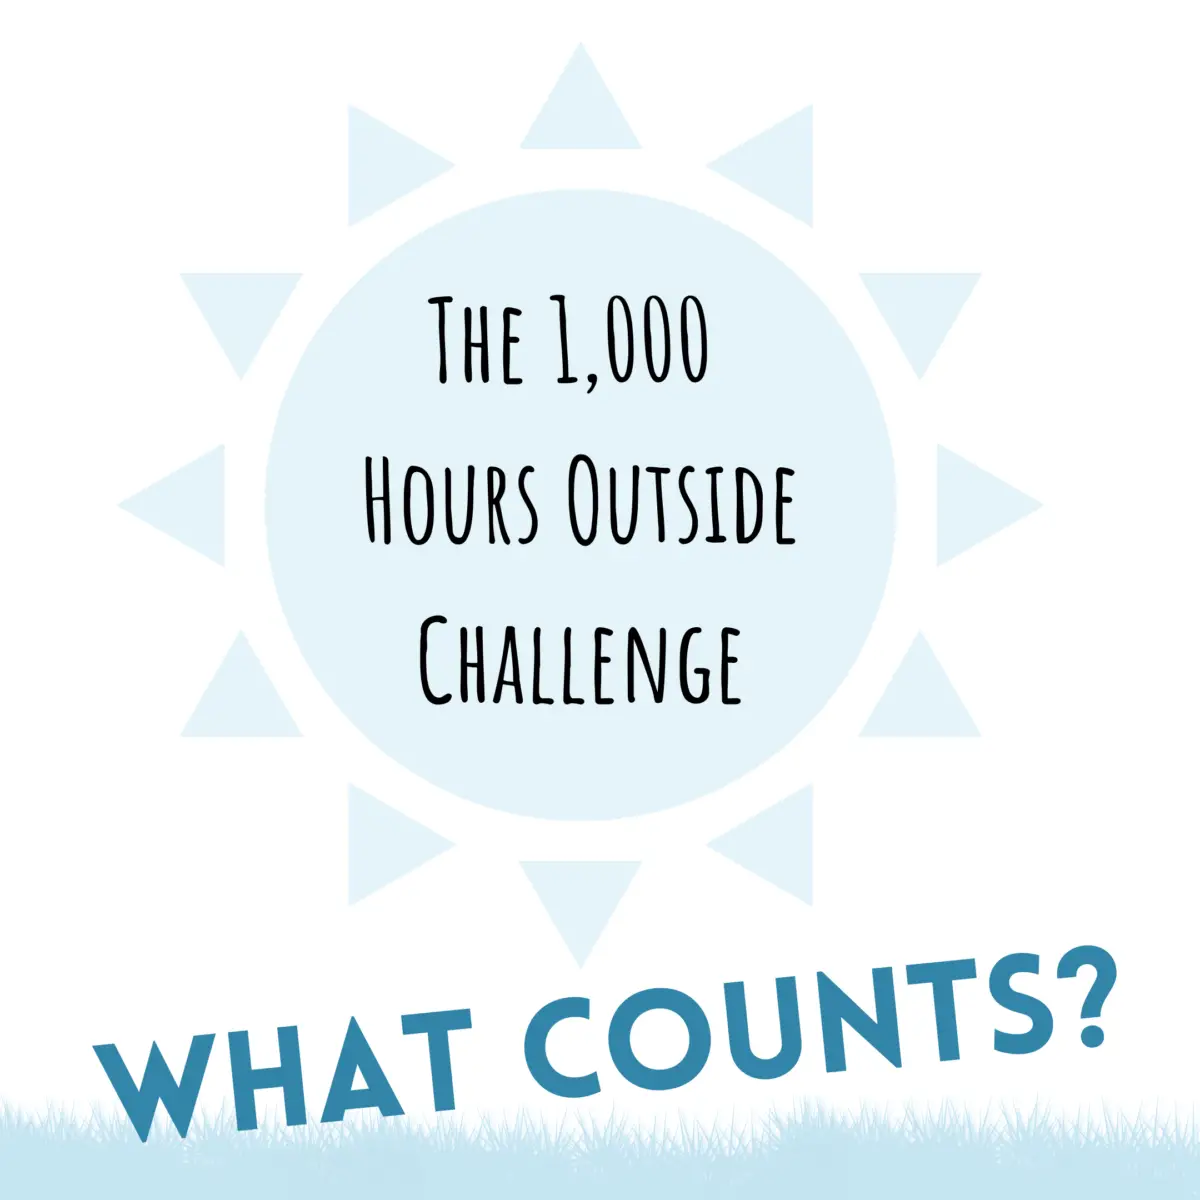 The 1000 hours outside challenge - what counts?